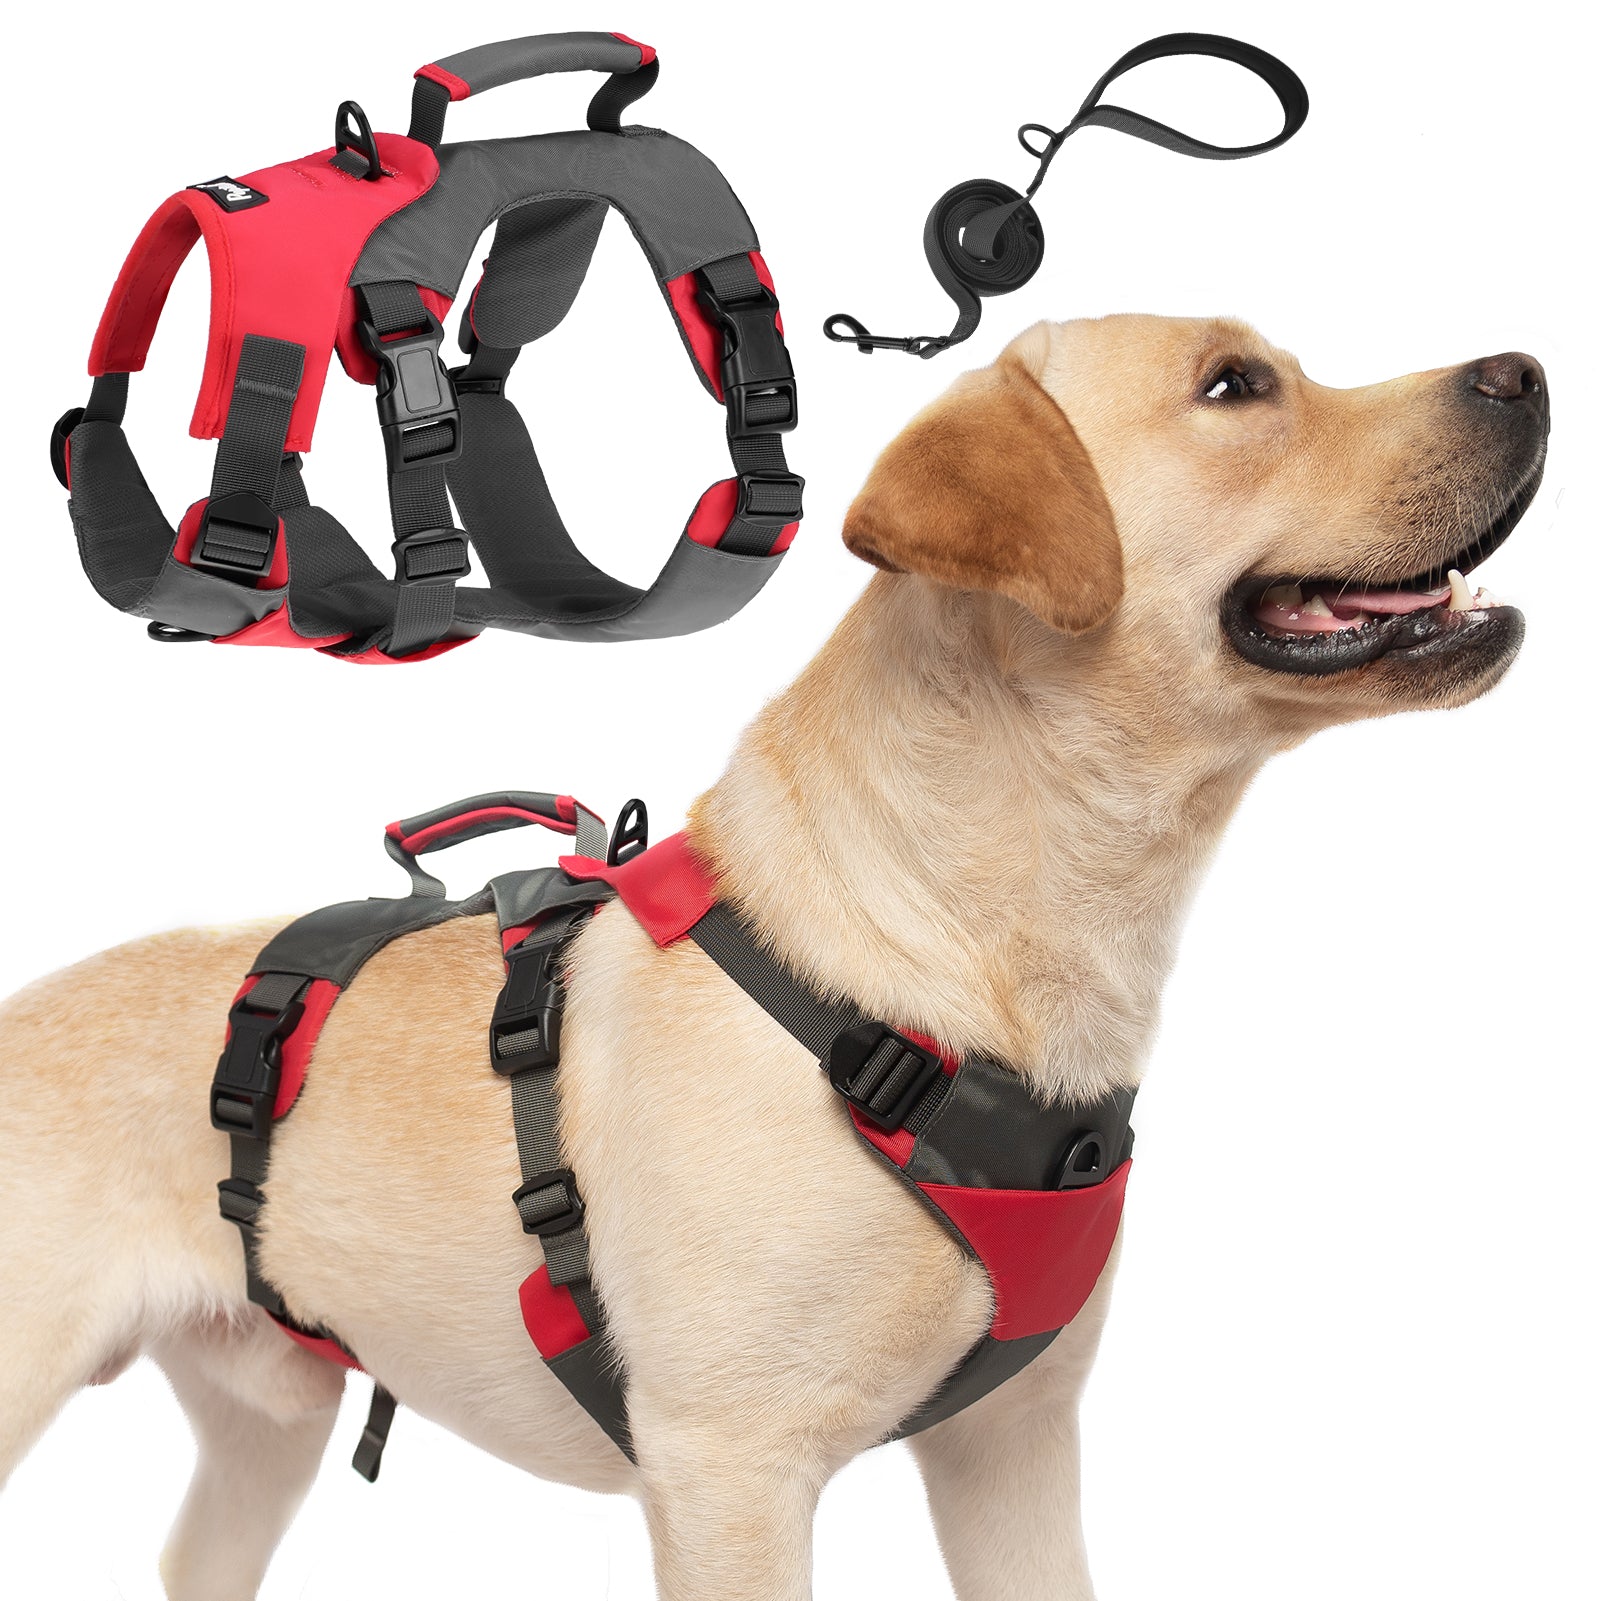 PUPTECK Escape Proof Dog Harness - No Pull Soft Padded Dog Vest Harness and  Double Handles Leash Set for Large Dogs Walking Training Hiking Hunting